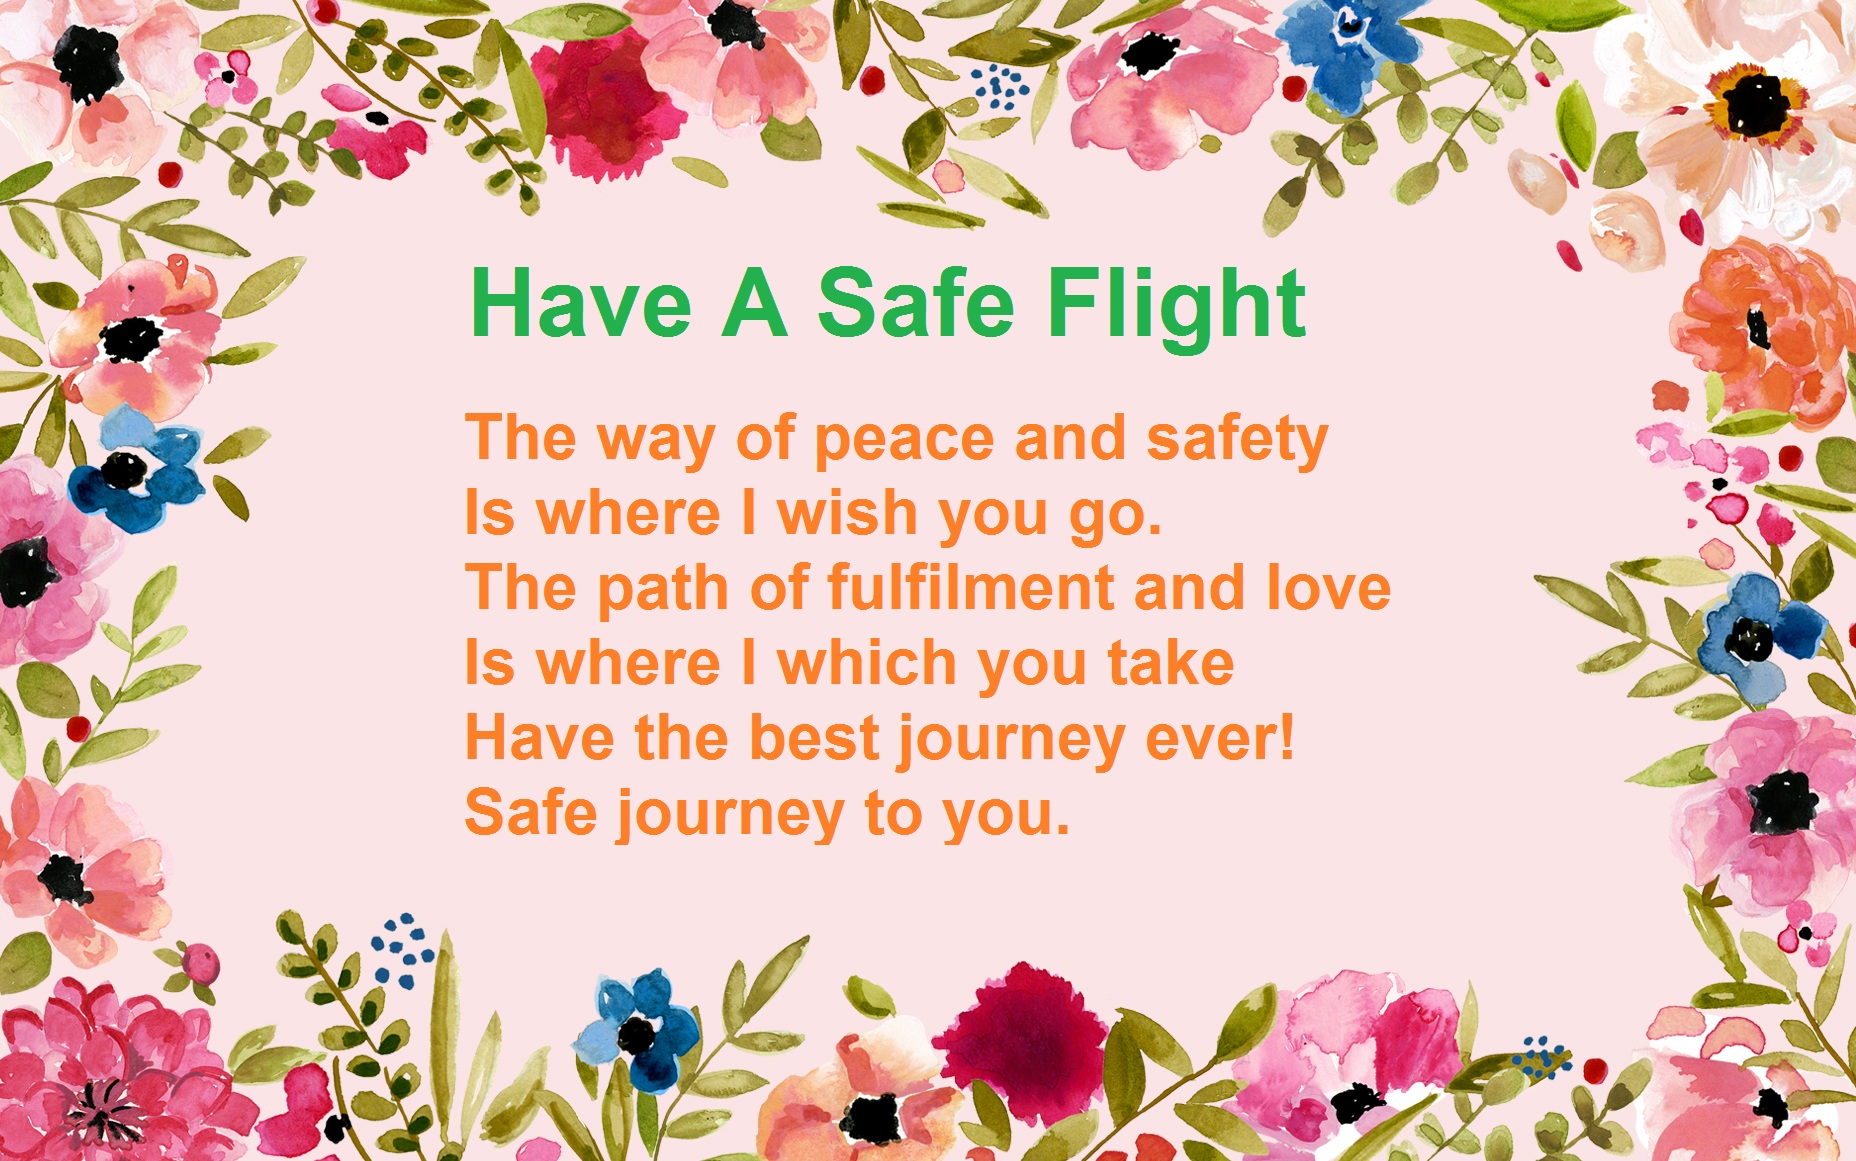 Have-A-Safe-Flight-Quotes-and-acImages